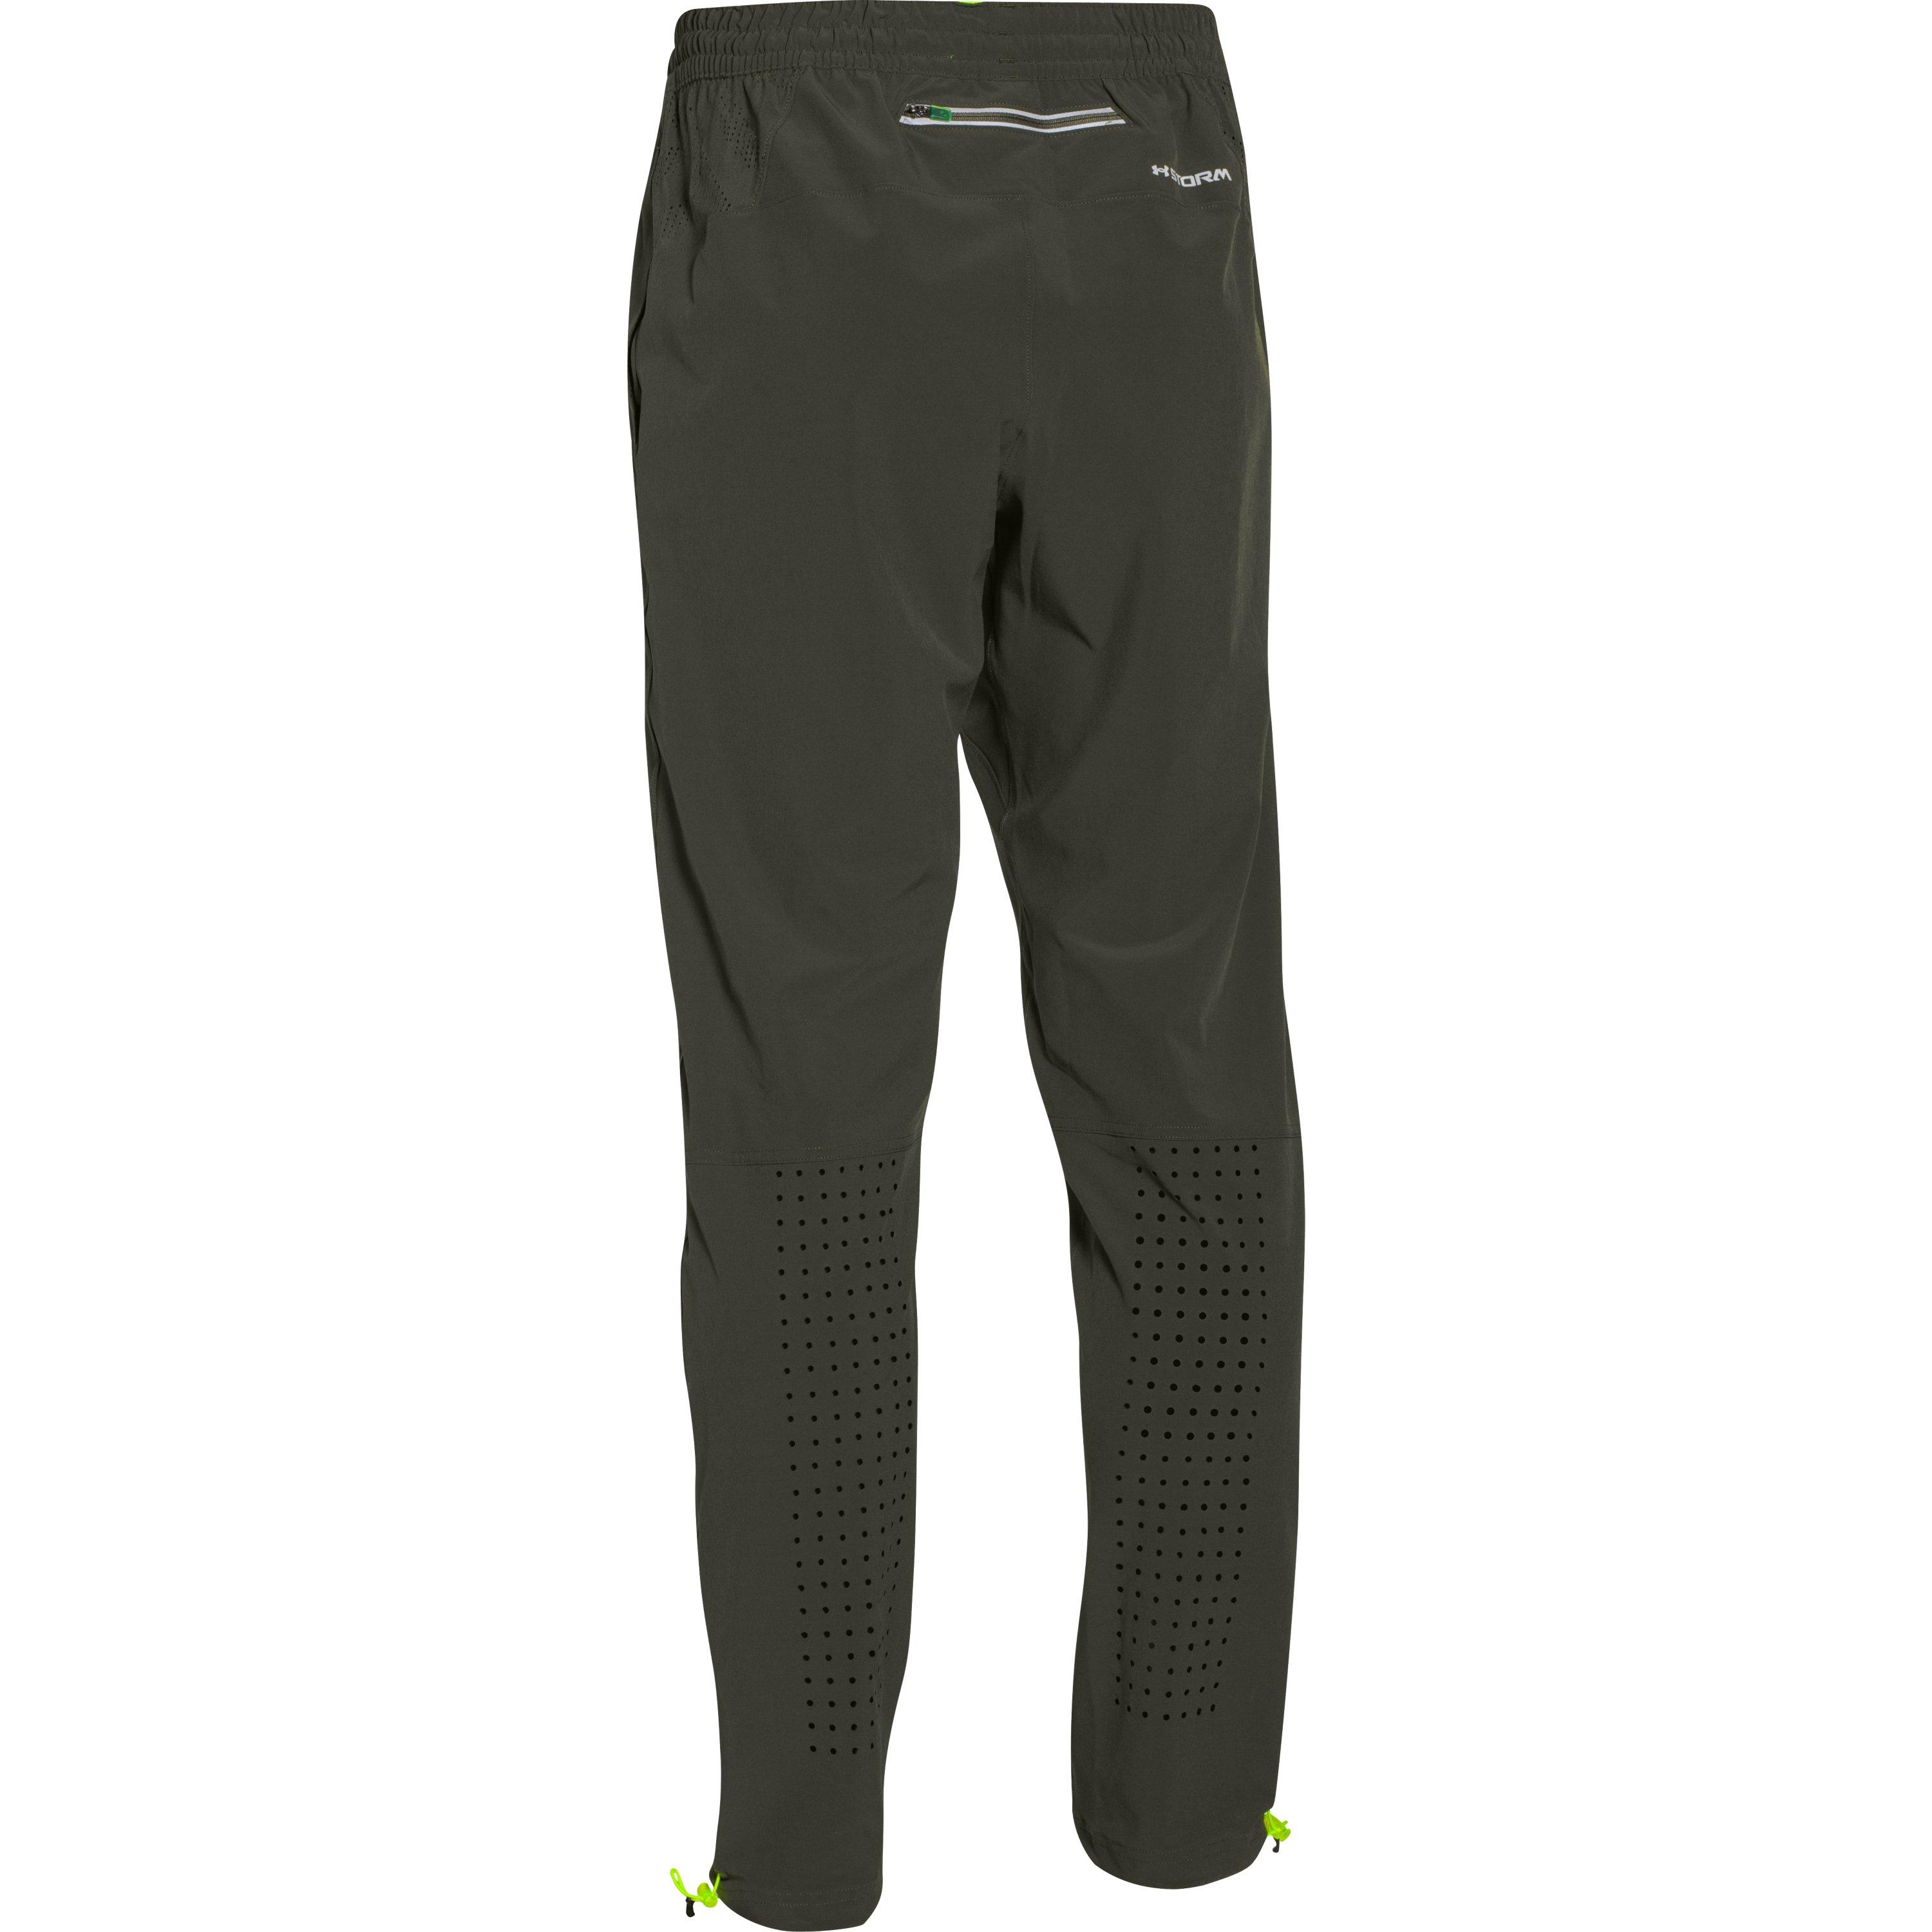 under armour storm running pants